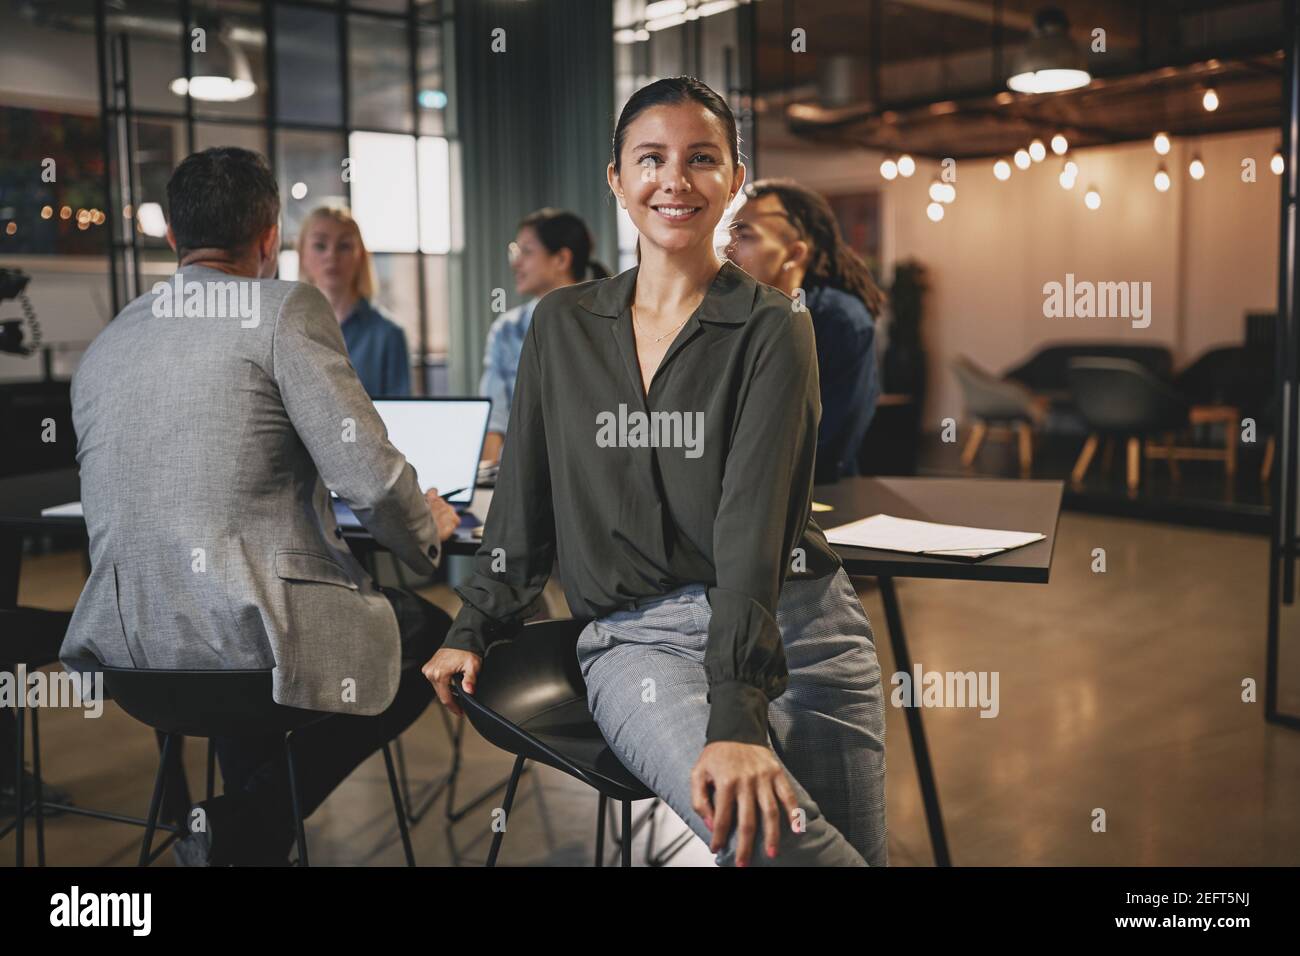 Young businesswoman smiling while sitting in an office with coworkers talking together at a table in the background Stock Photo